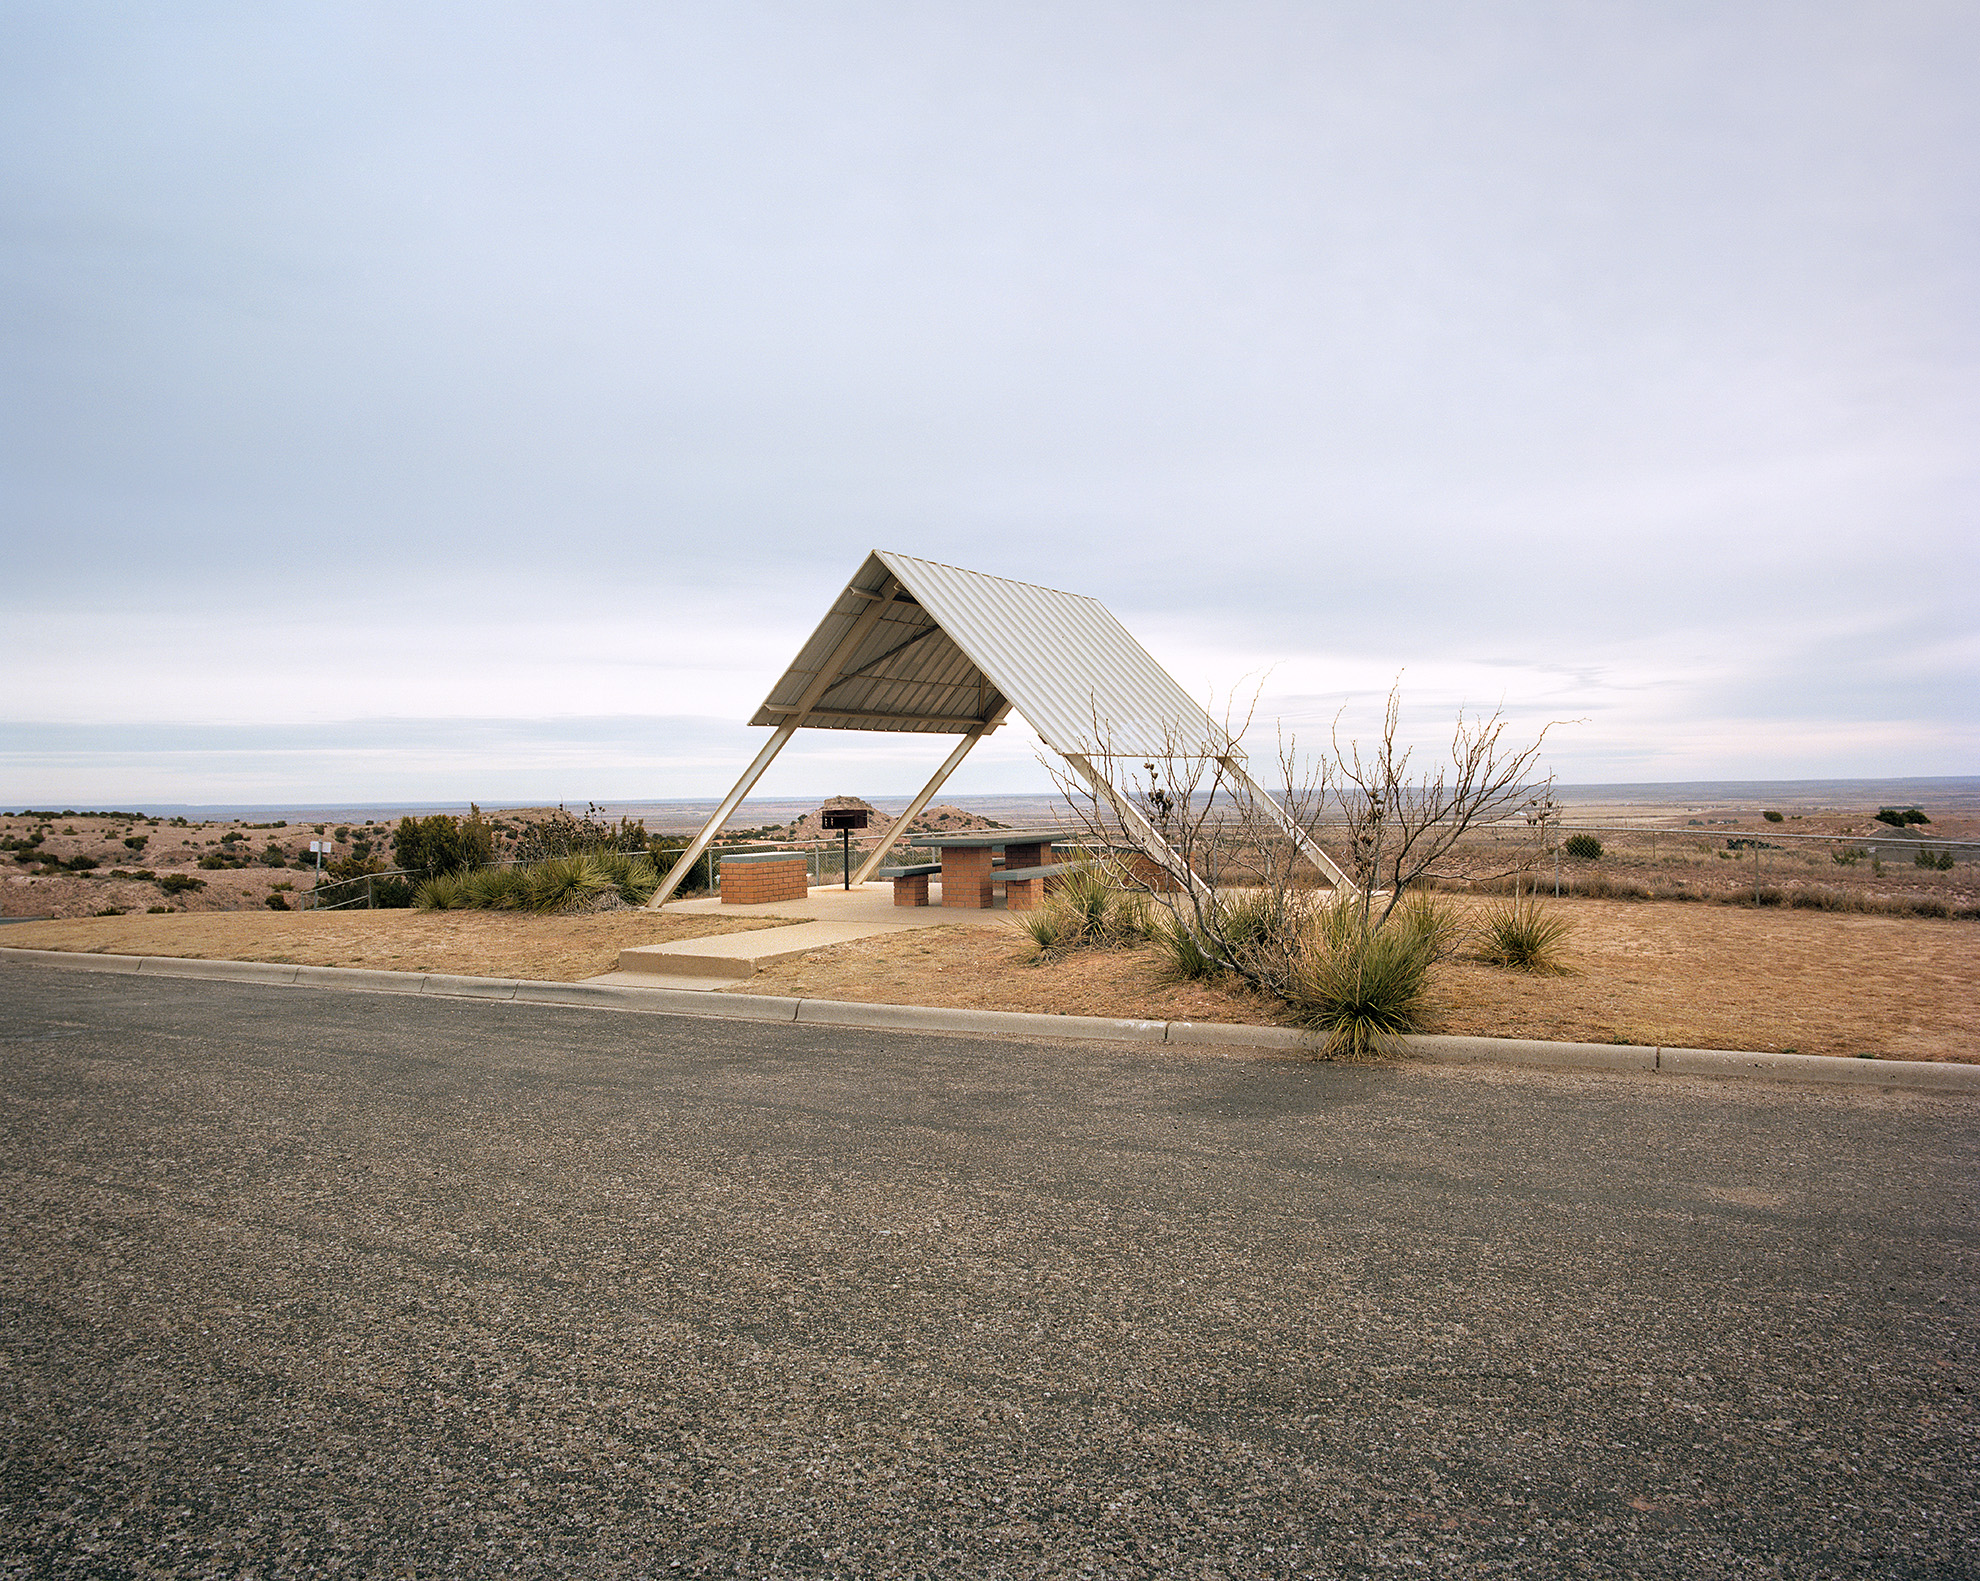 Humble Rest Stops Are Endangered Monuments Of America’s Highways